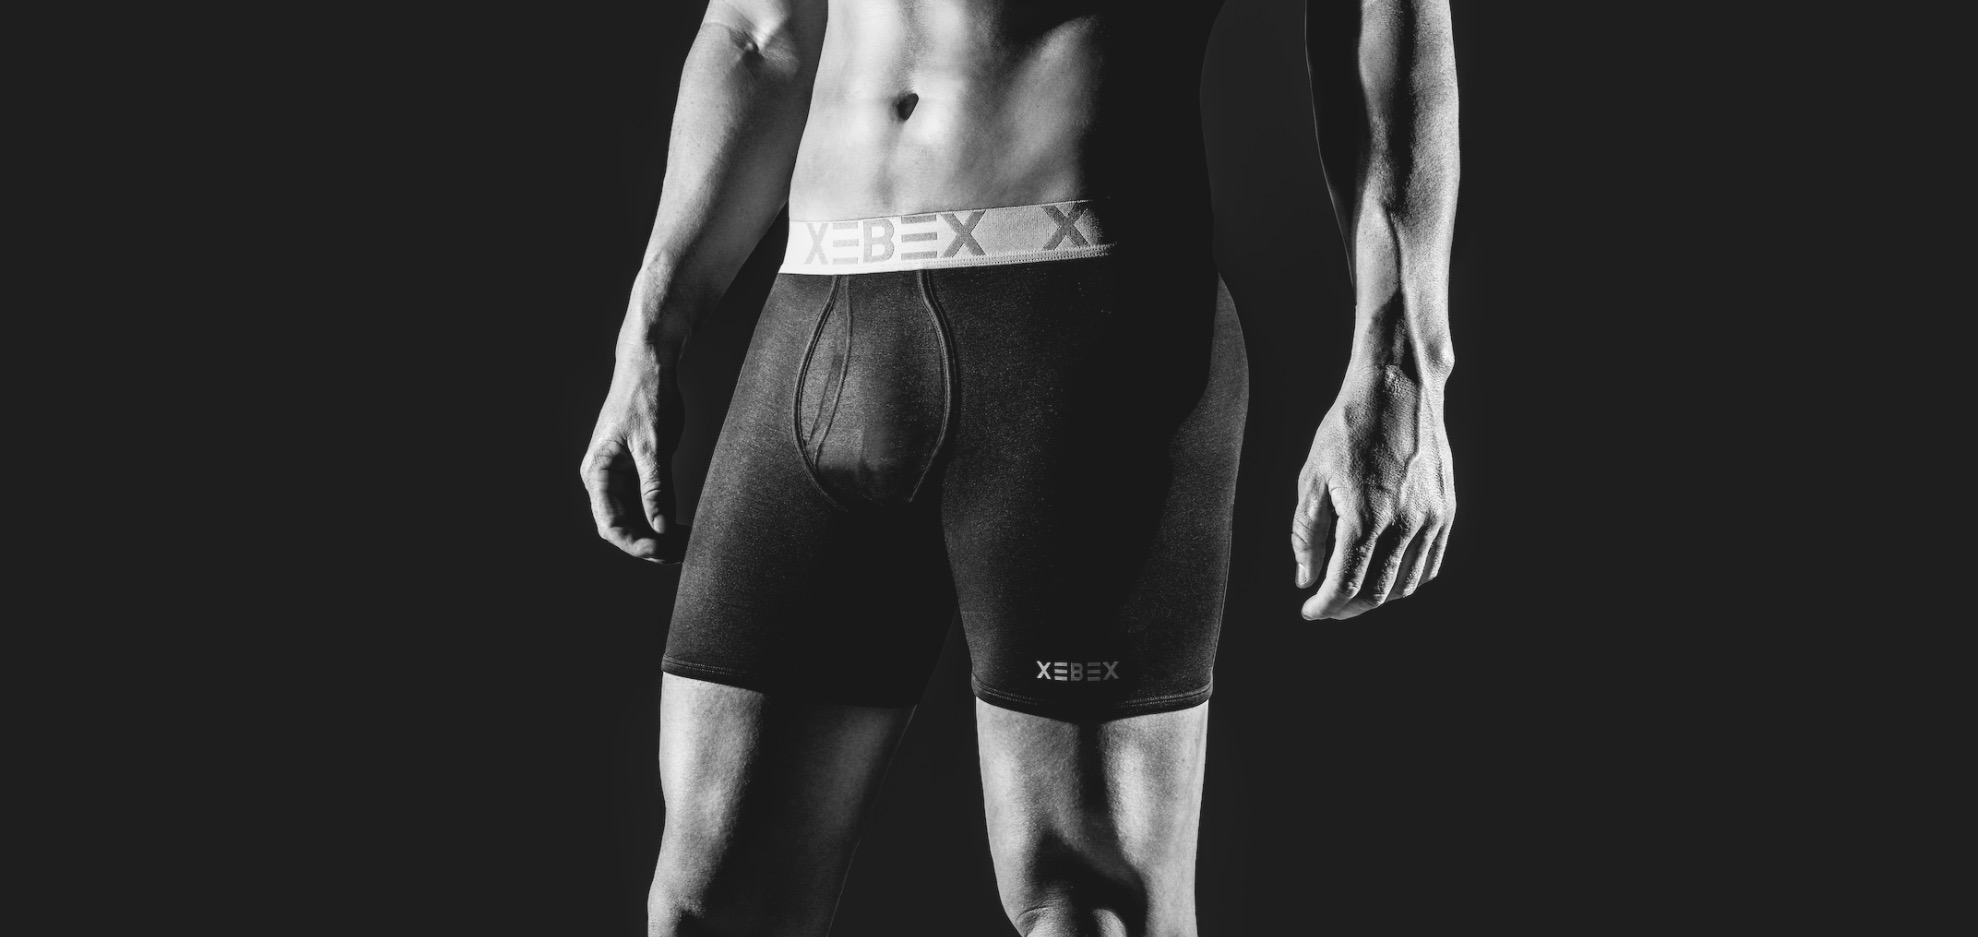 Xebex About Modal Boxer Brief Black on Charcoal